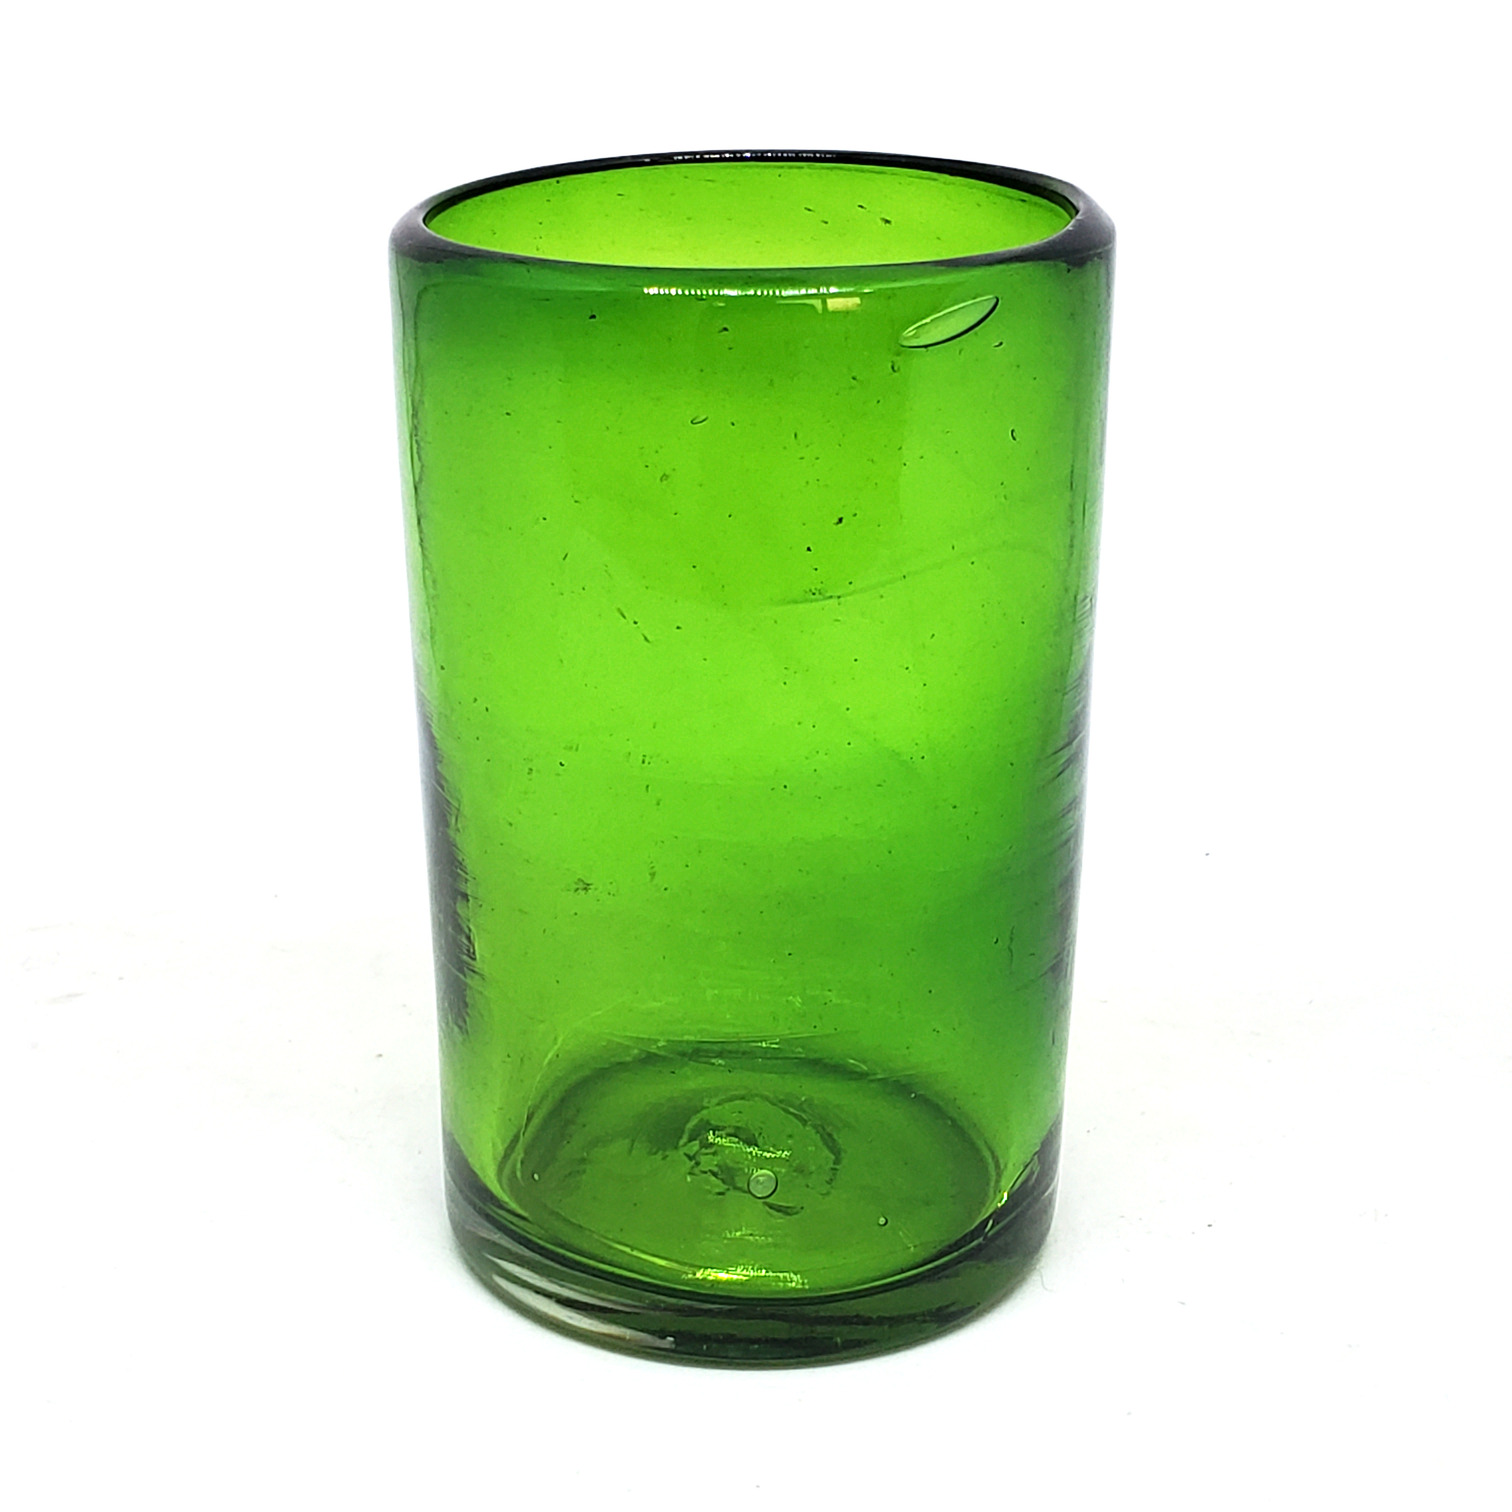 MEXICAN GLASSWARE / Solid Emerald Green 14 oz Drinking Glasses (set of 6) / These handcrafted glasses deliver a classic touch to your favorite drink.